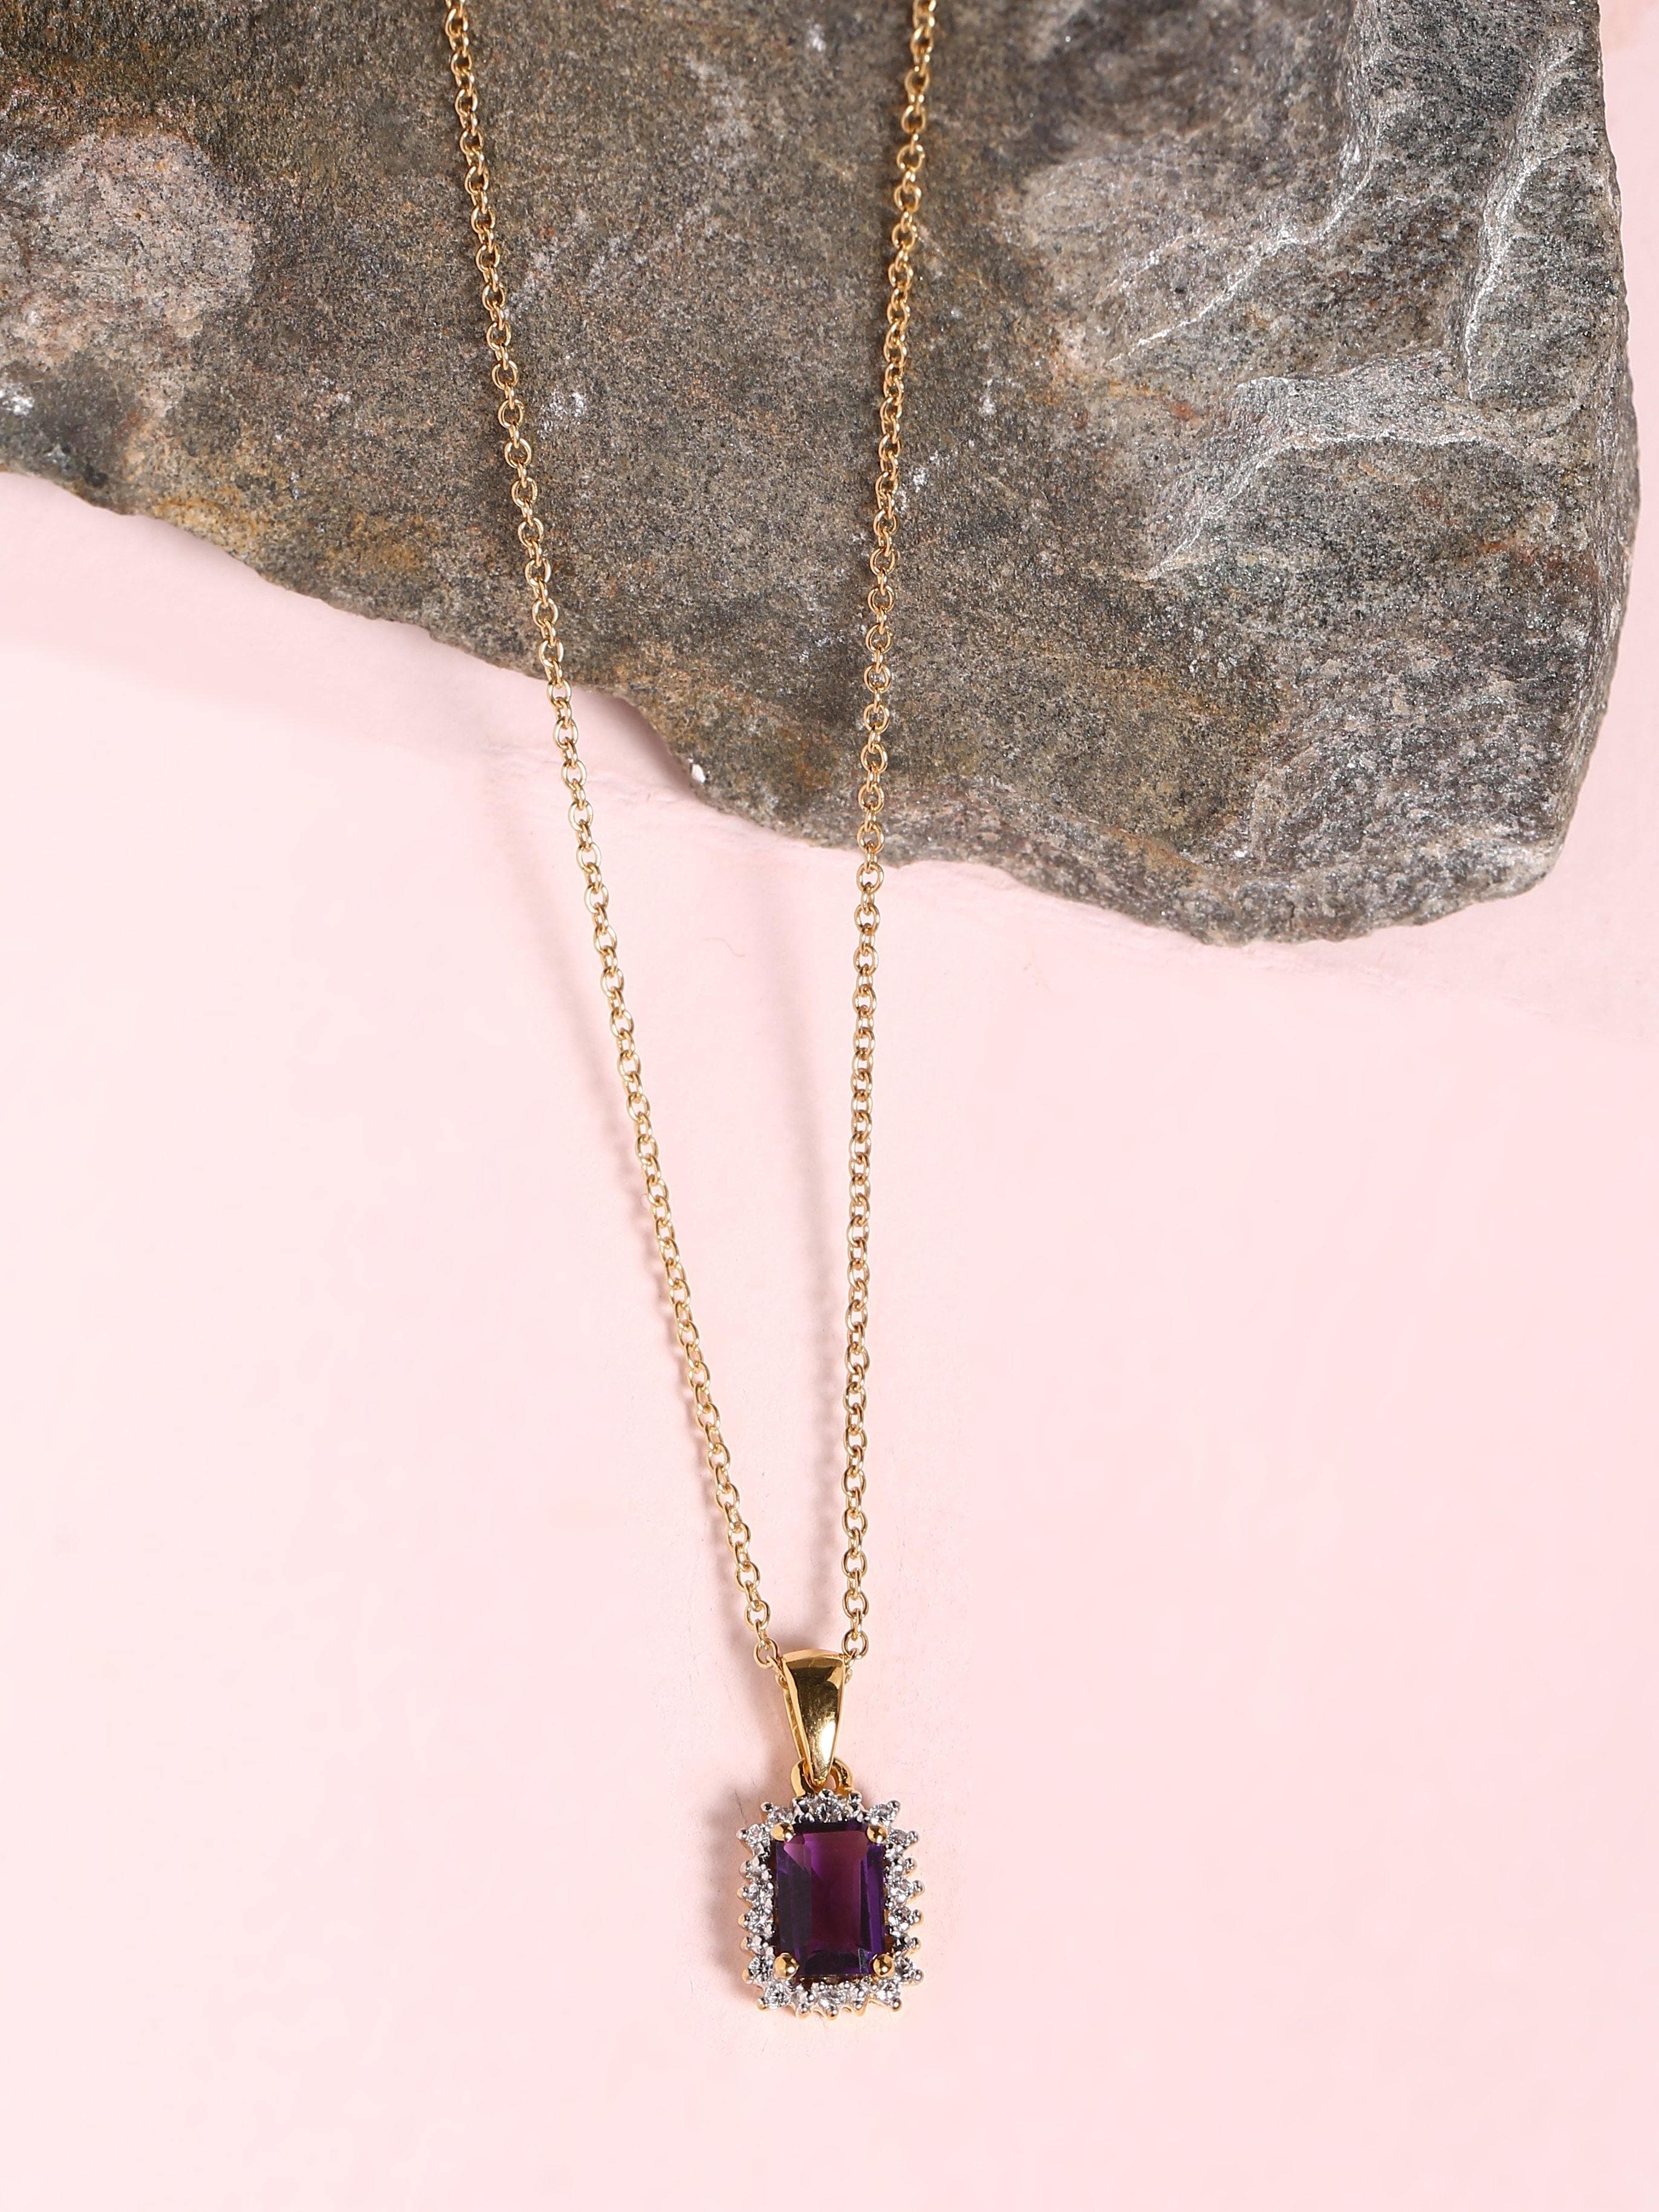 0.67 Ct. Amethyst Solid 10k Yellow Gold Chain Pendant Necklace Jewelry - YoTreasure